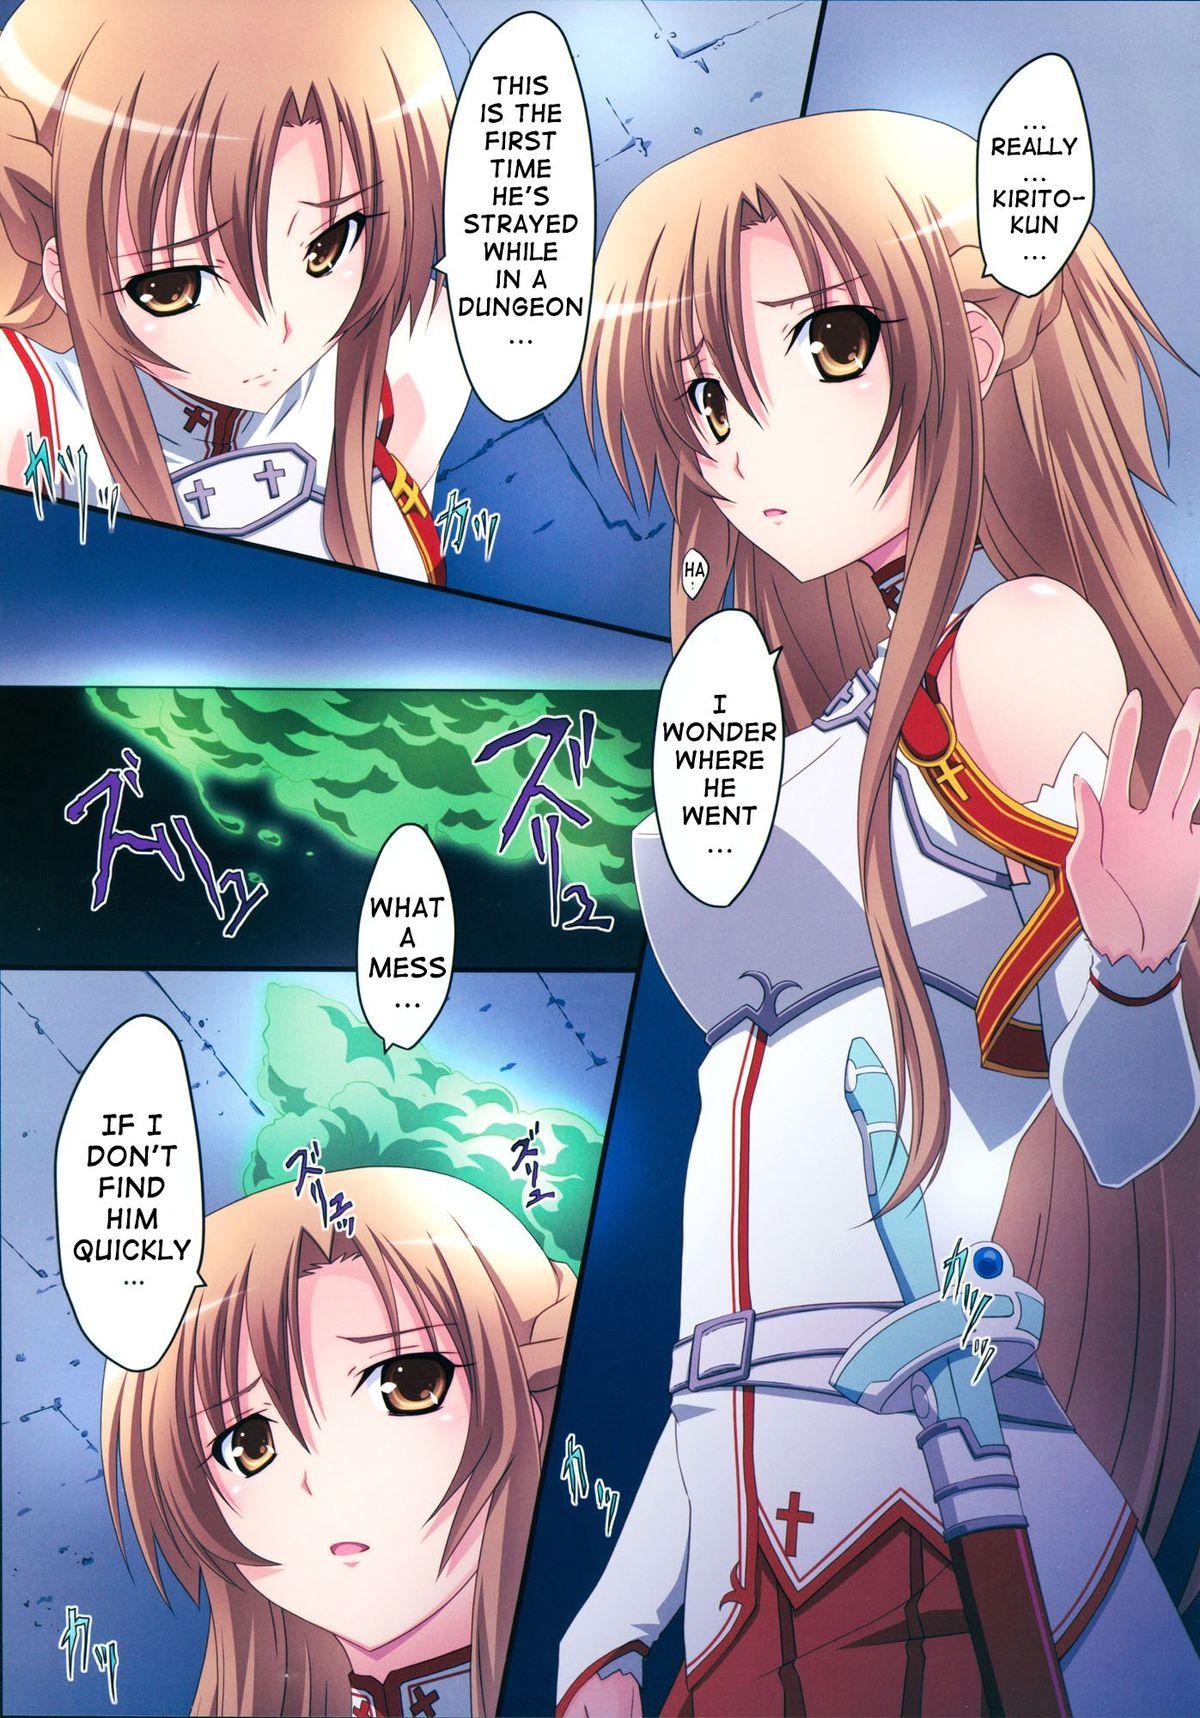 Hooker Asuna! Close Call - Sword art online Hairypussy - Page 4